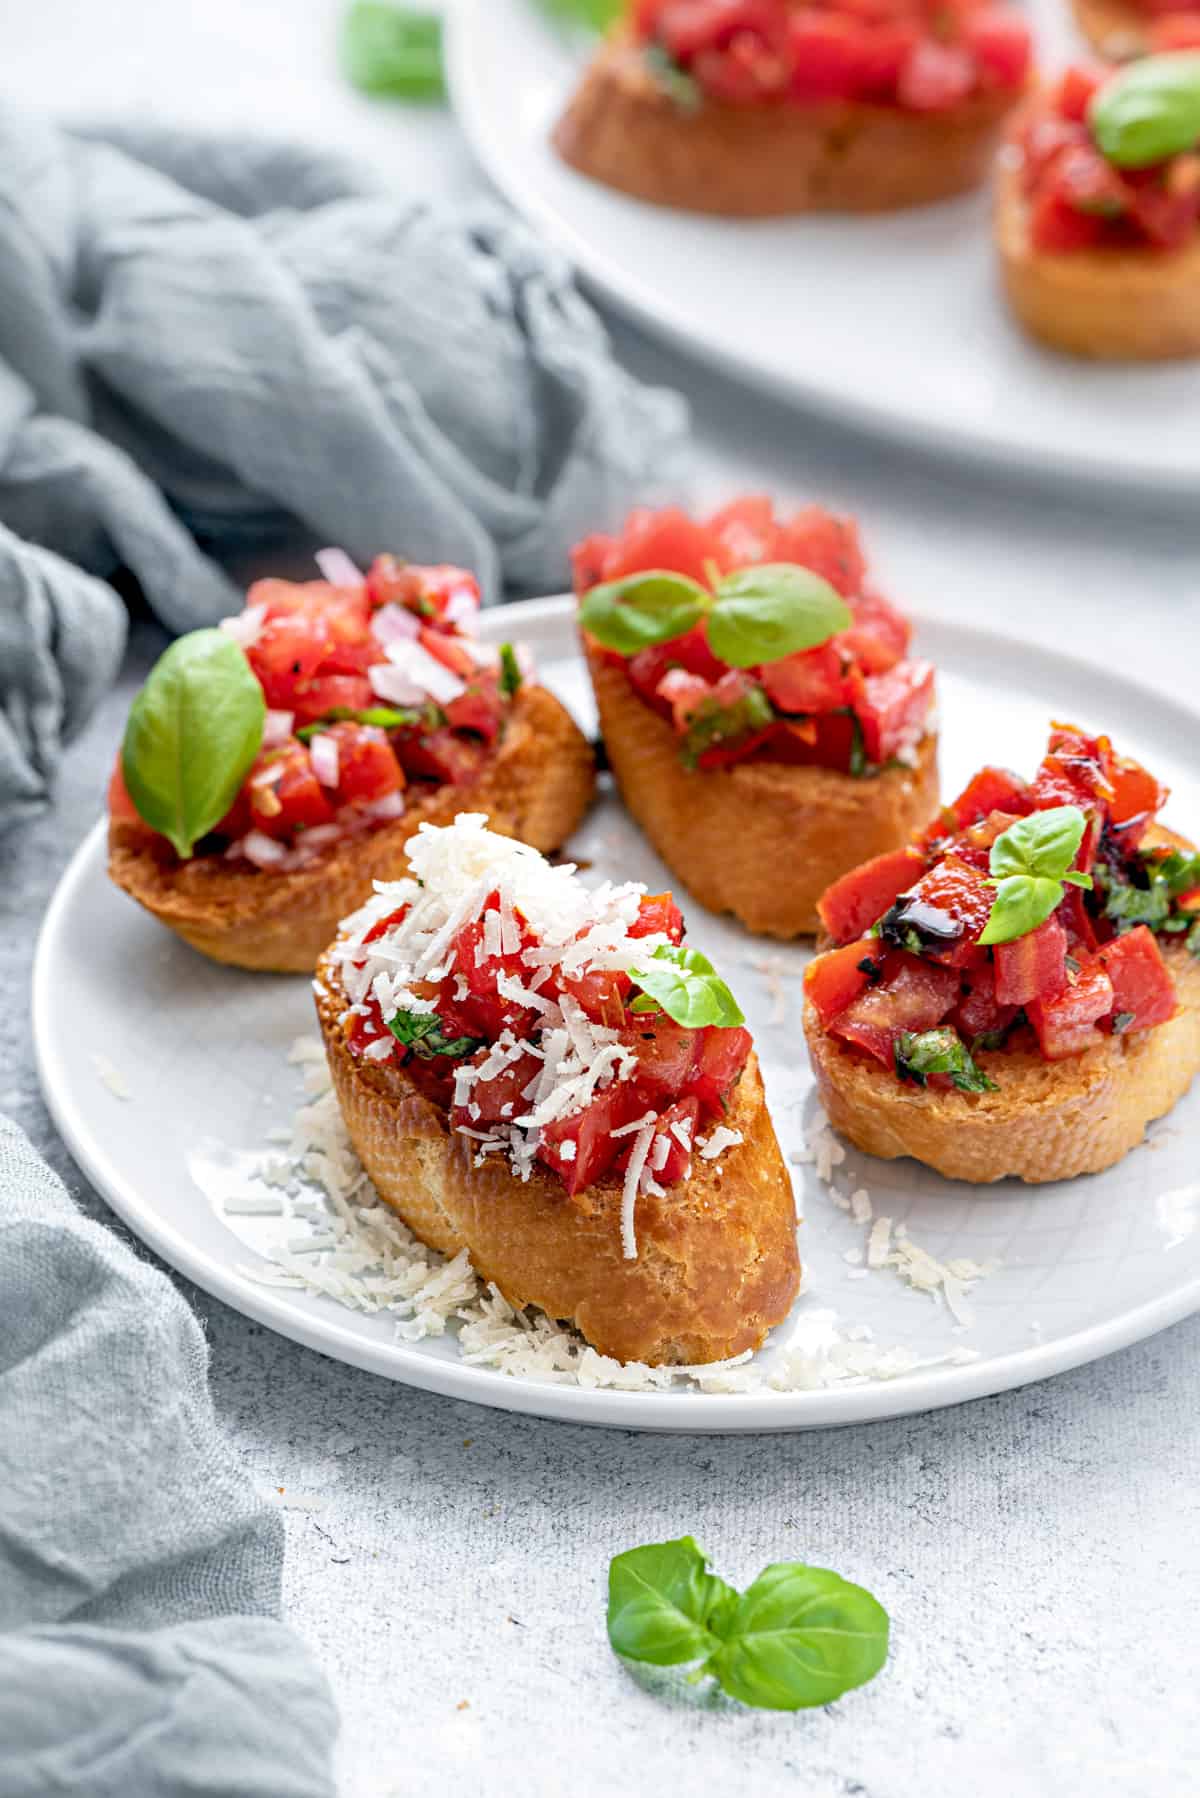 4 servings of bruschetta. A few pieces of baby basil garnish the plate. One of the baguettes with tomatoes is topped with shredded parmesan cheese.